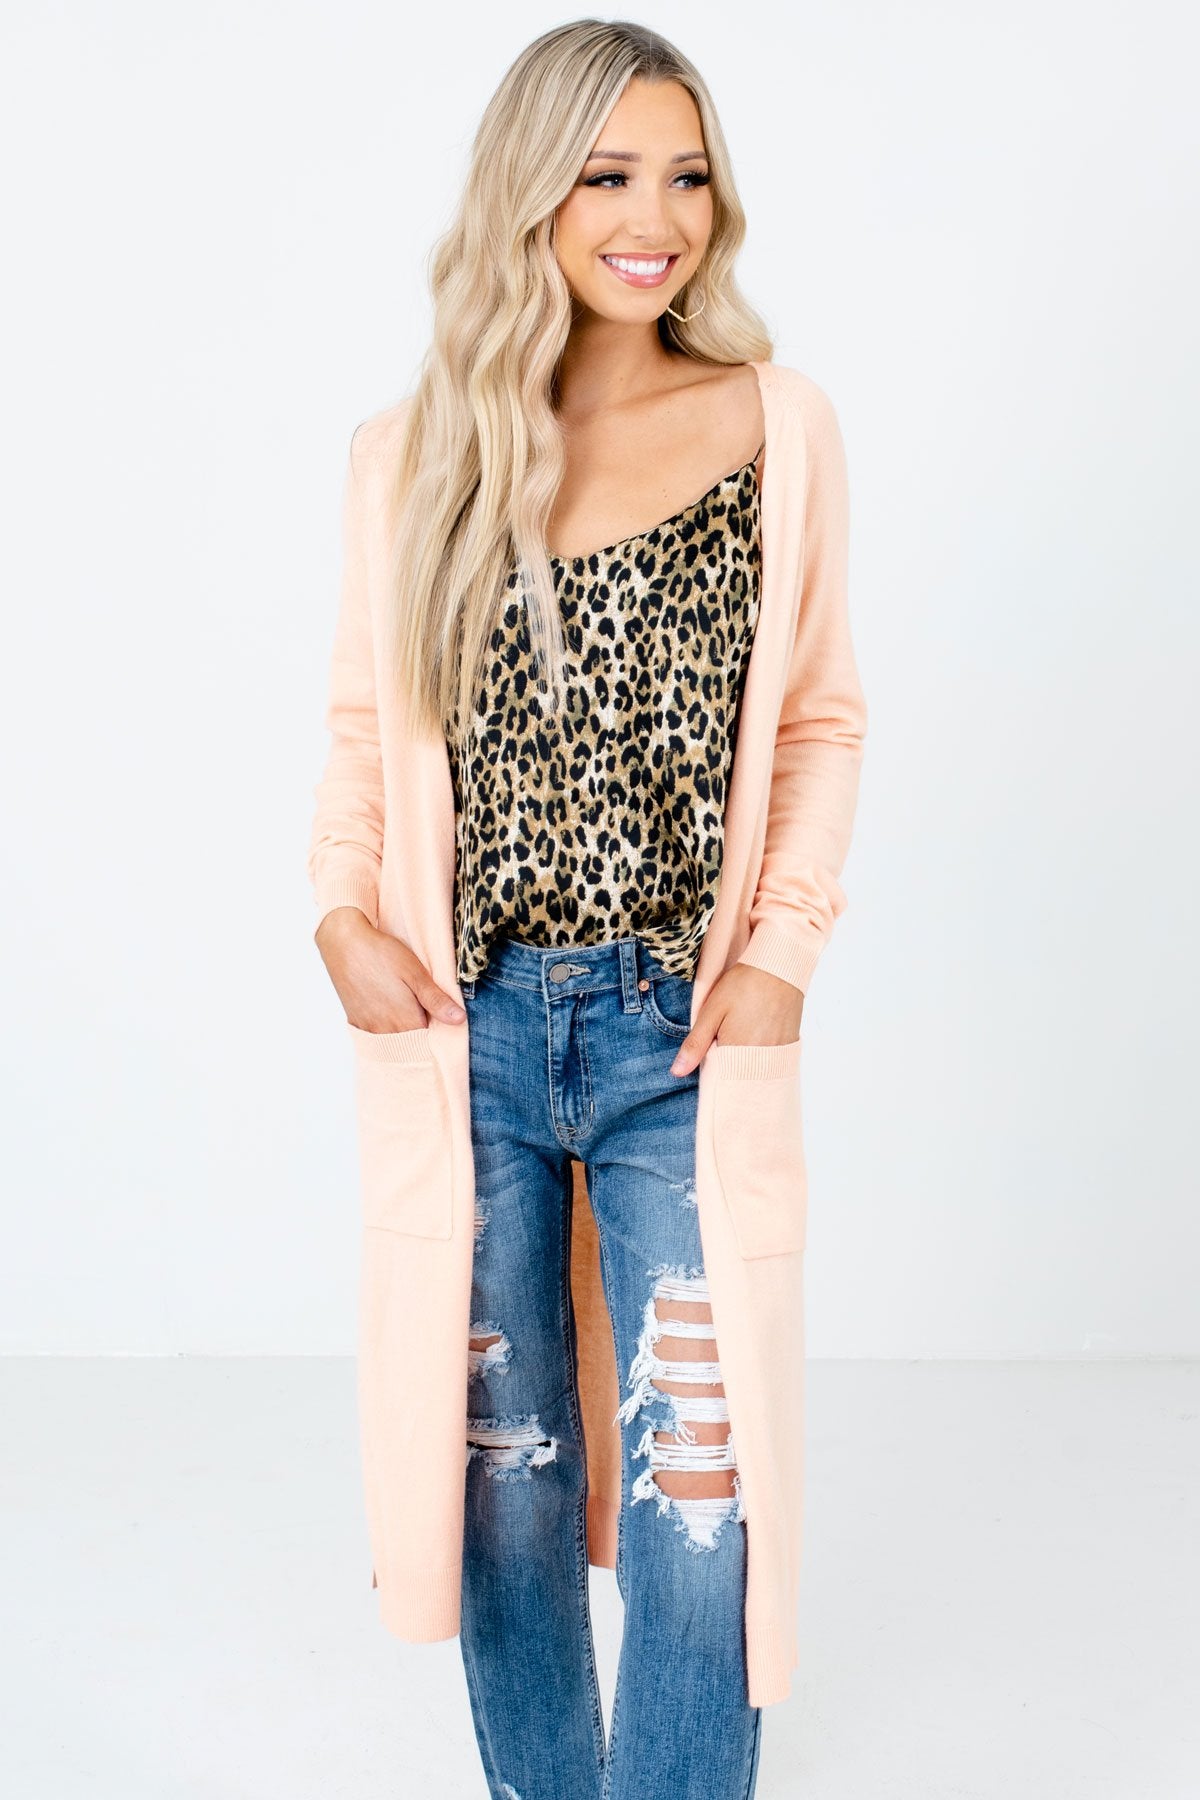 Peach Pink Long Length Boutique Cardigans for Women